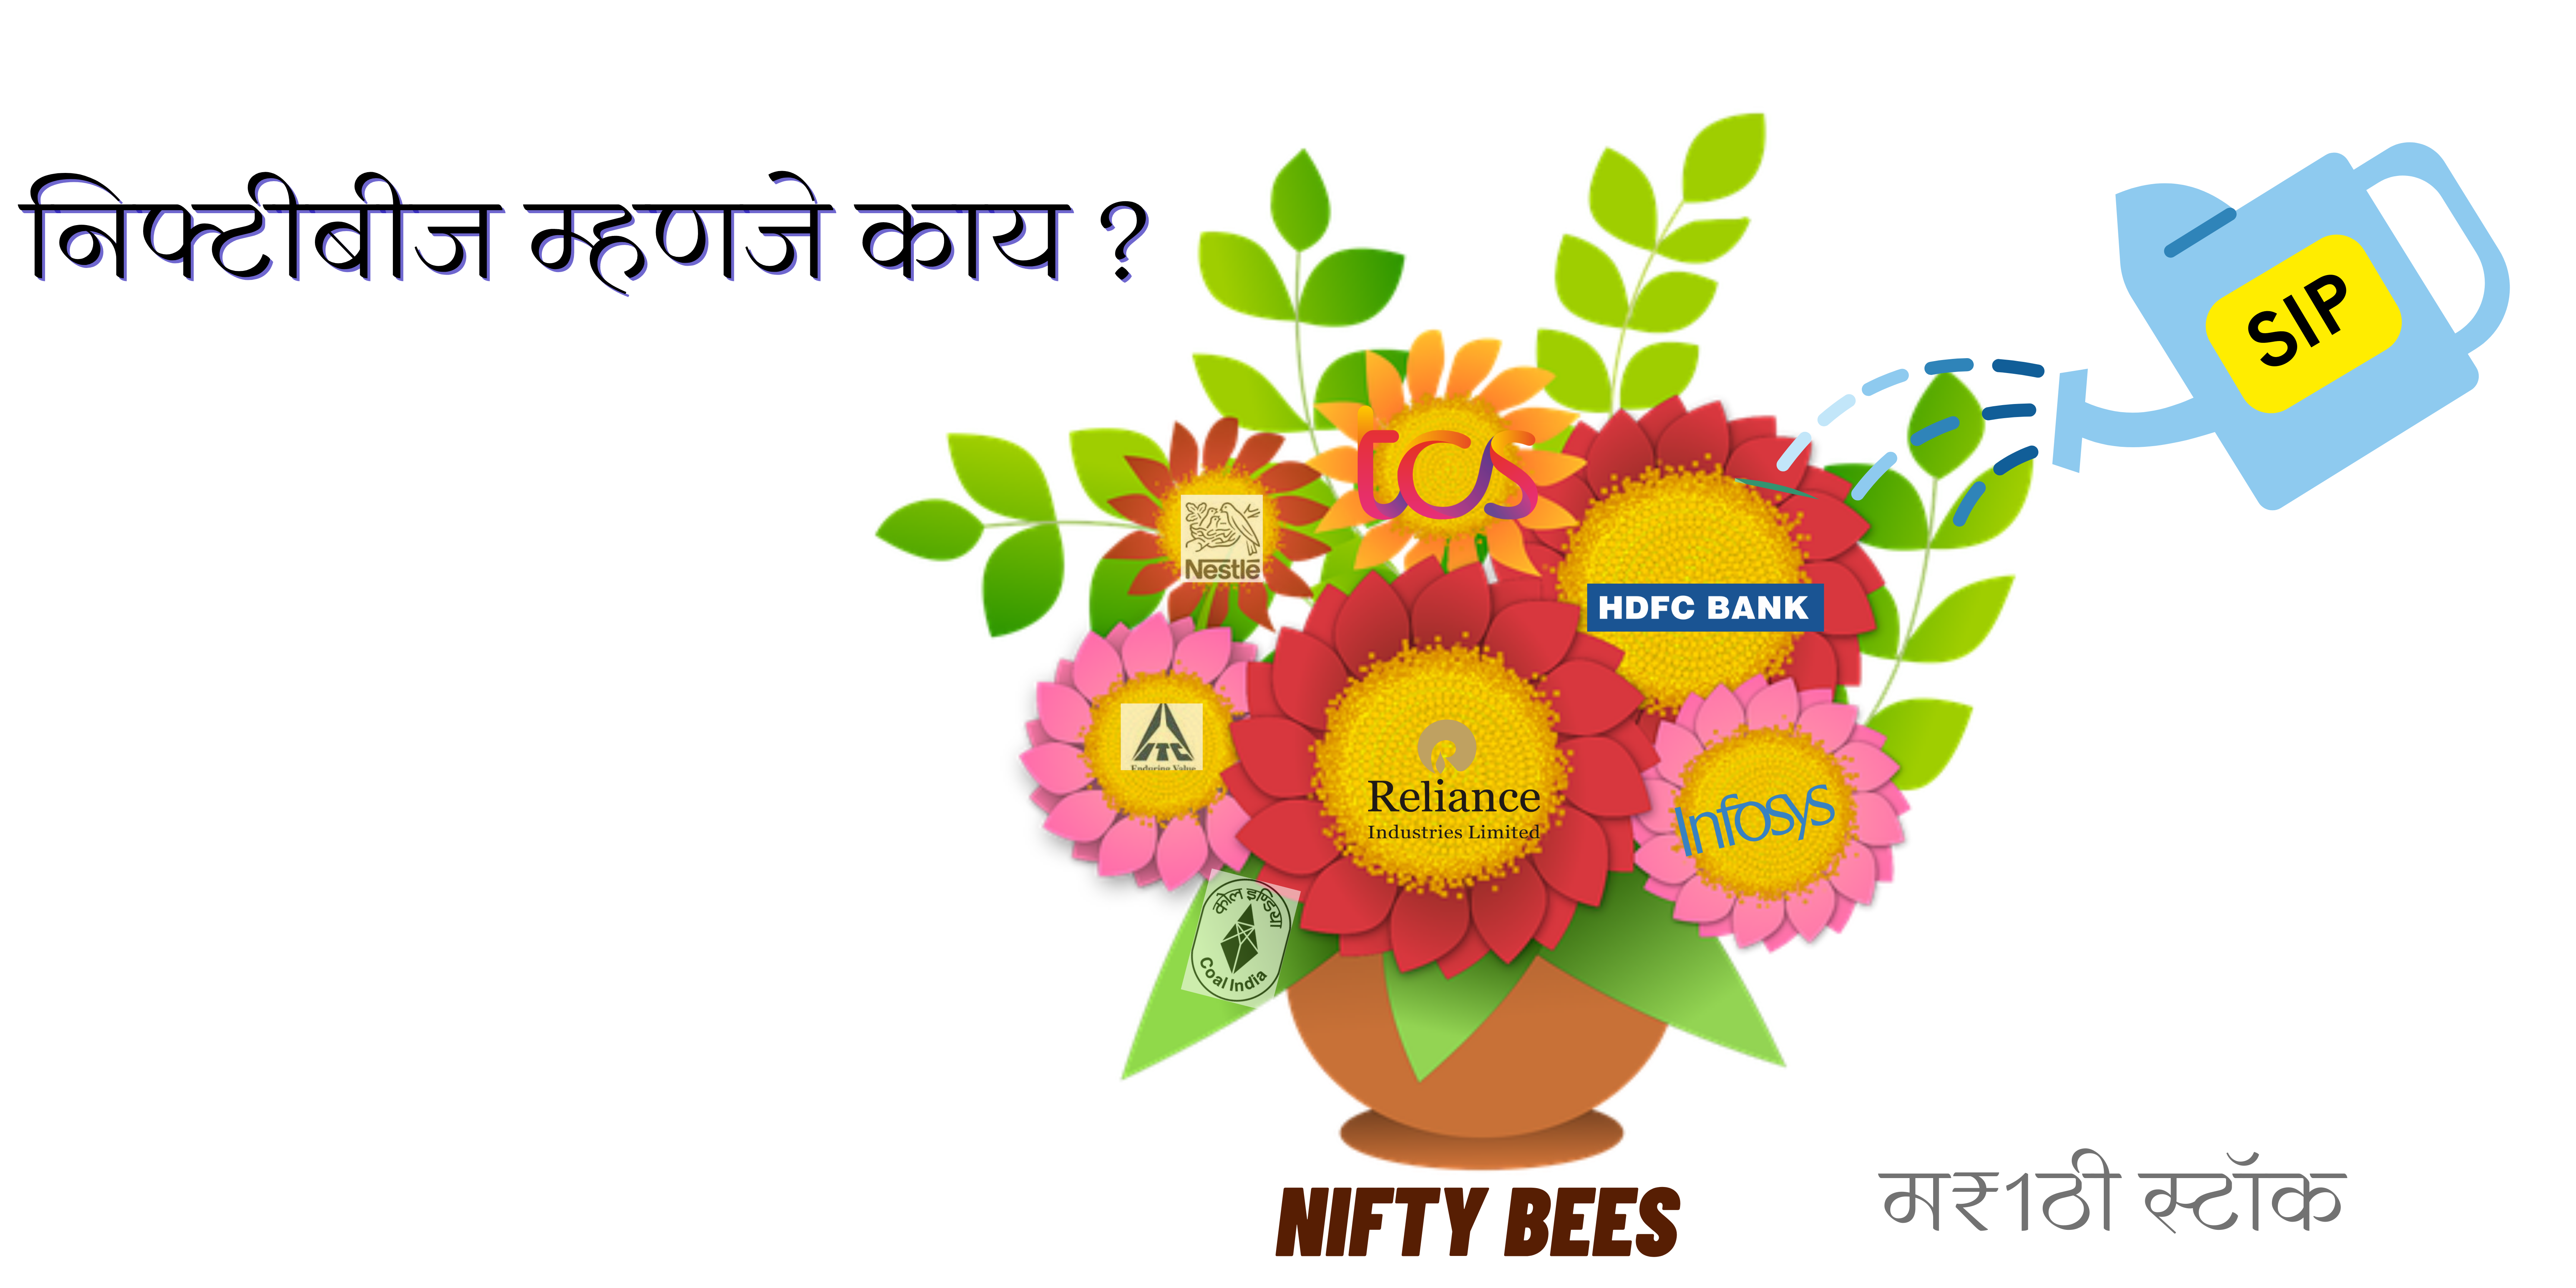 Nifty bees information in marathi